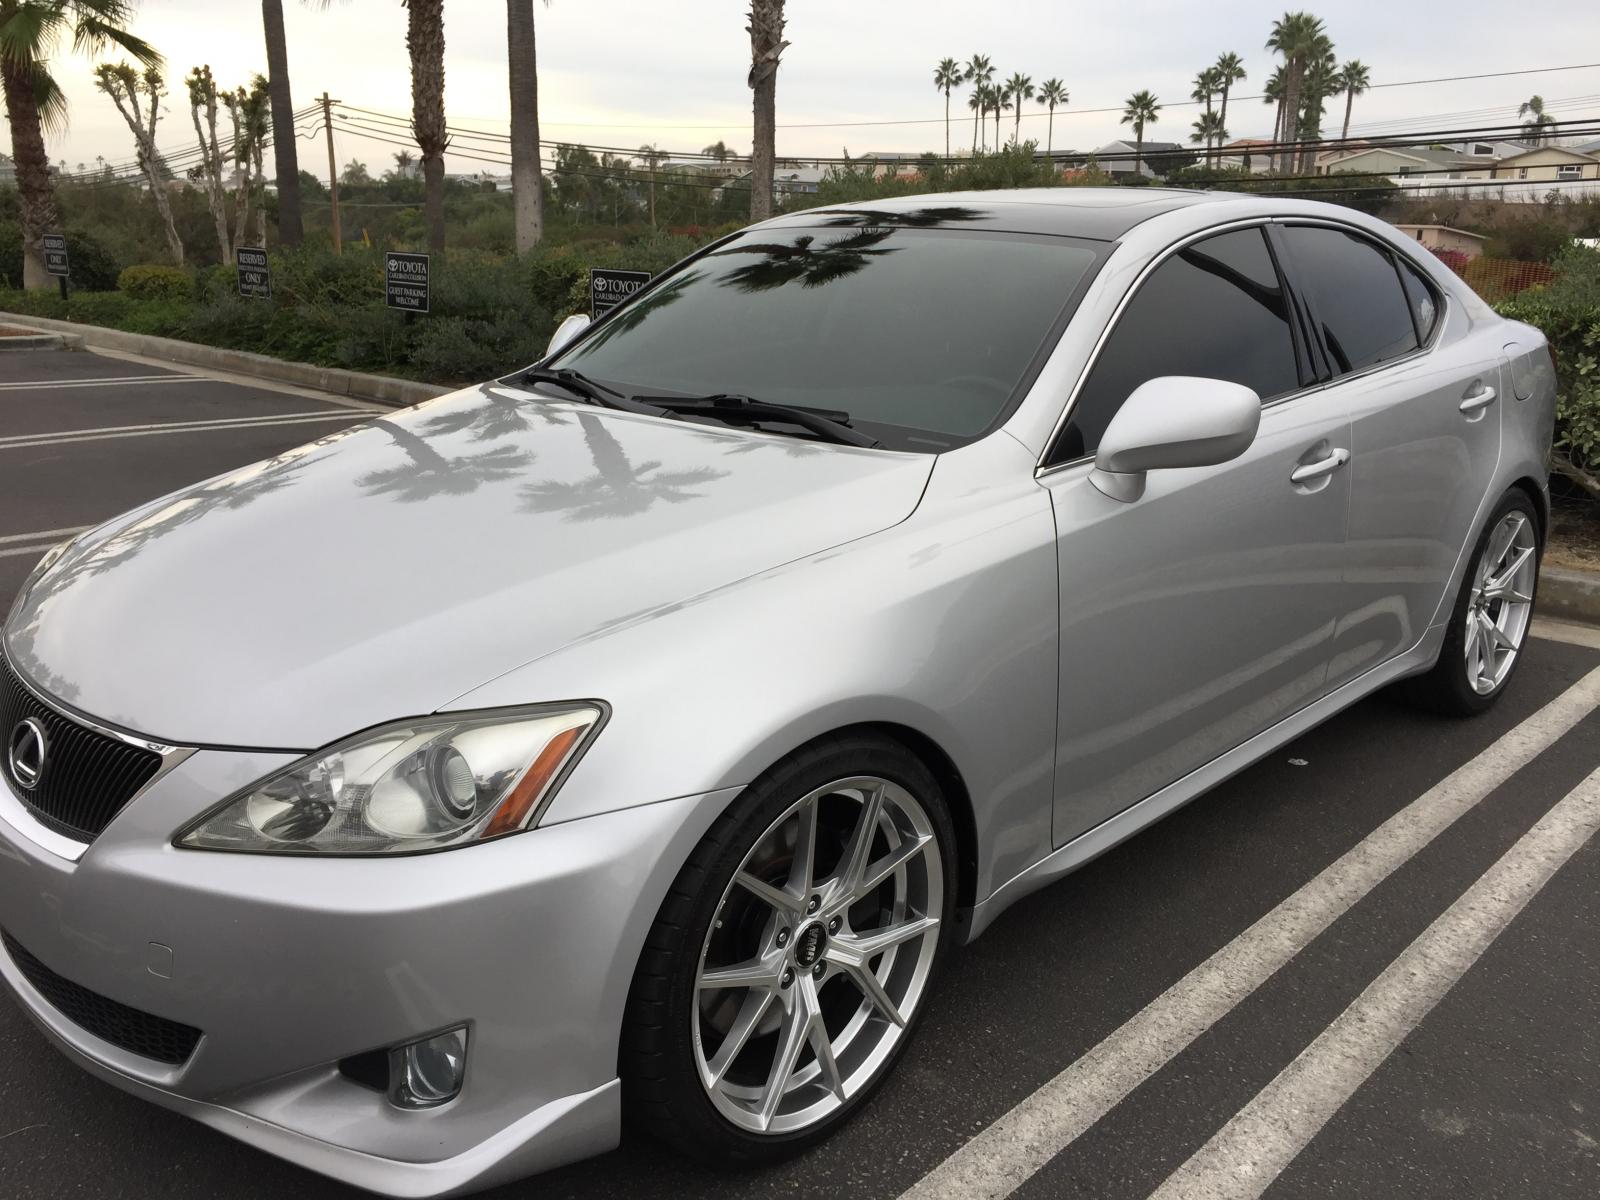 VMR 804 Staggered 19" Wheels for 2007 Lexus IS350